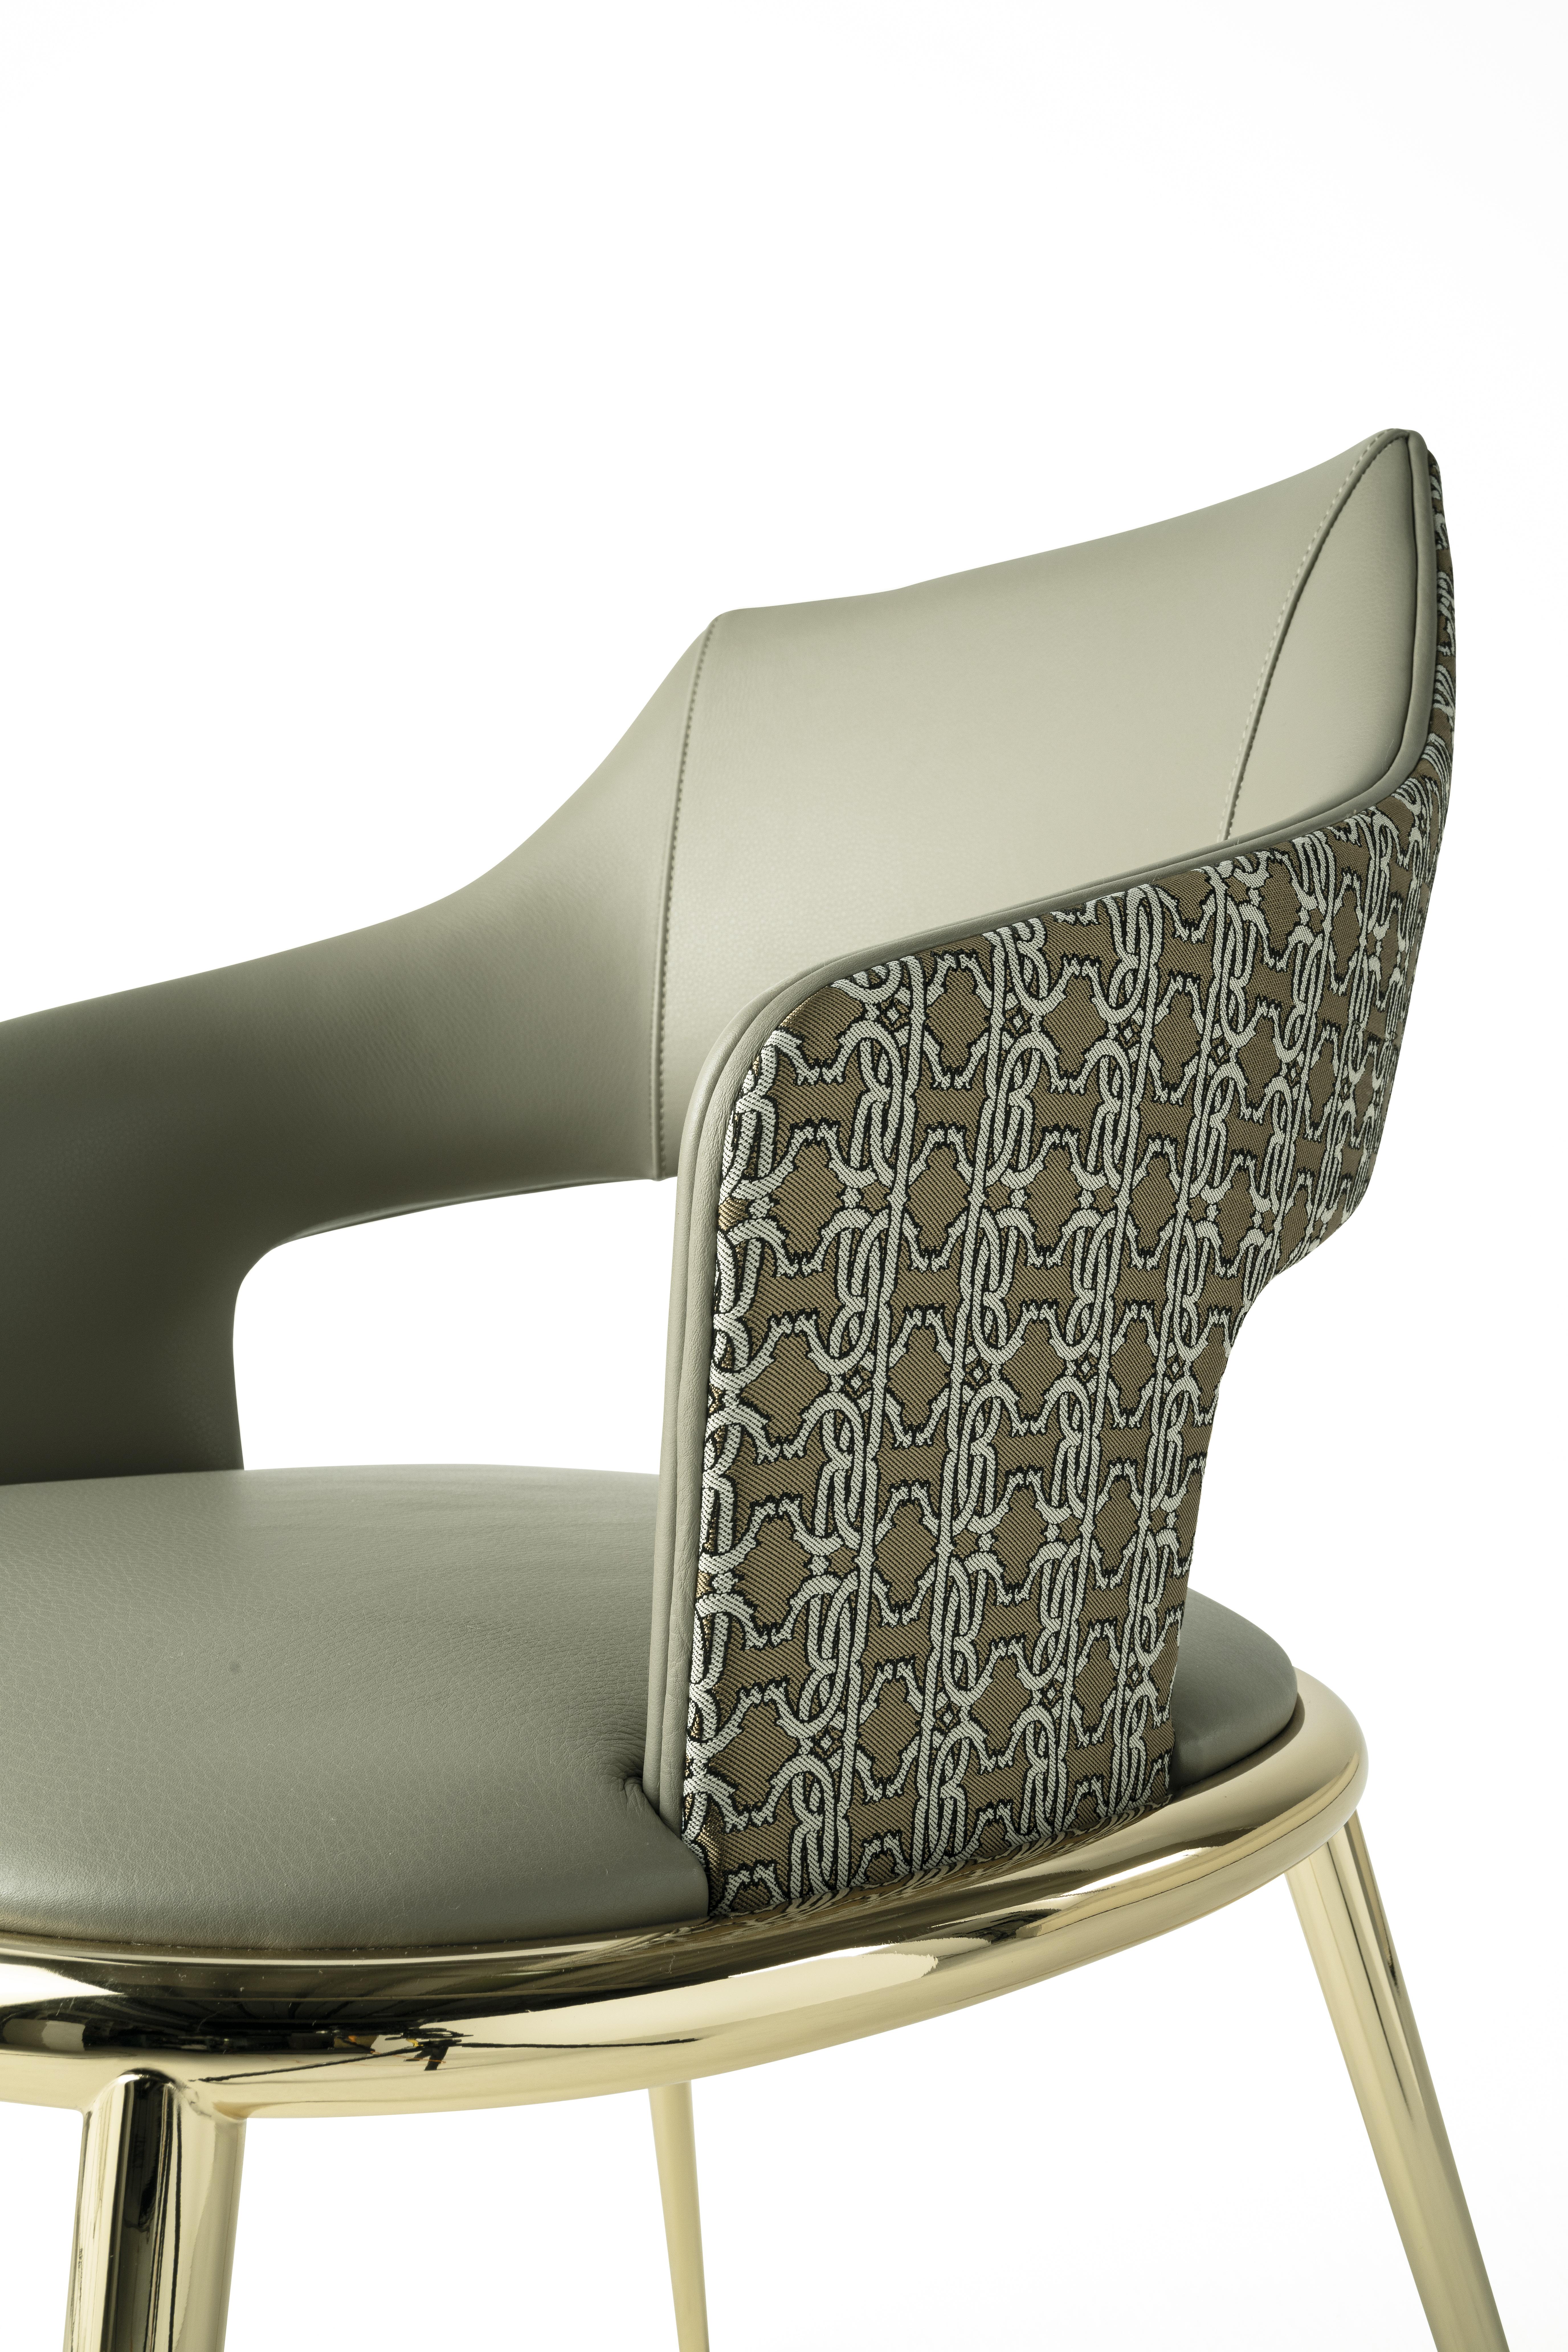 Contemporary 21st Century Shira Chair in Leather by Roberto Cavalli Home Interiors For Sale